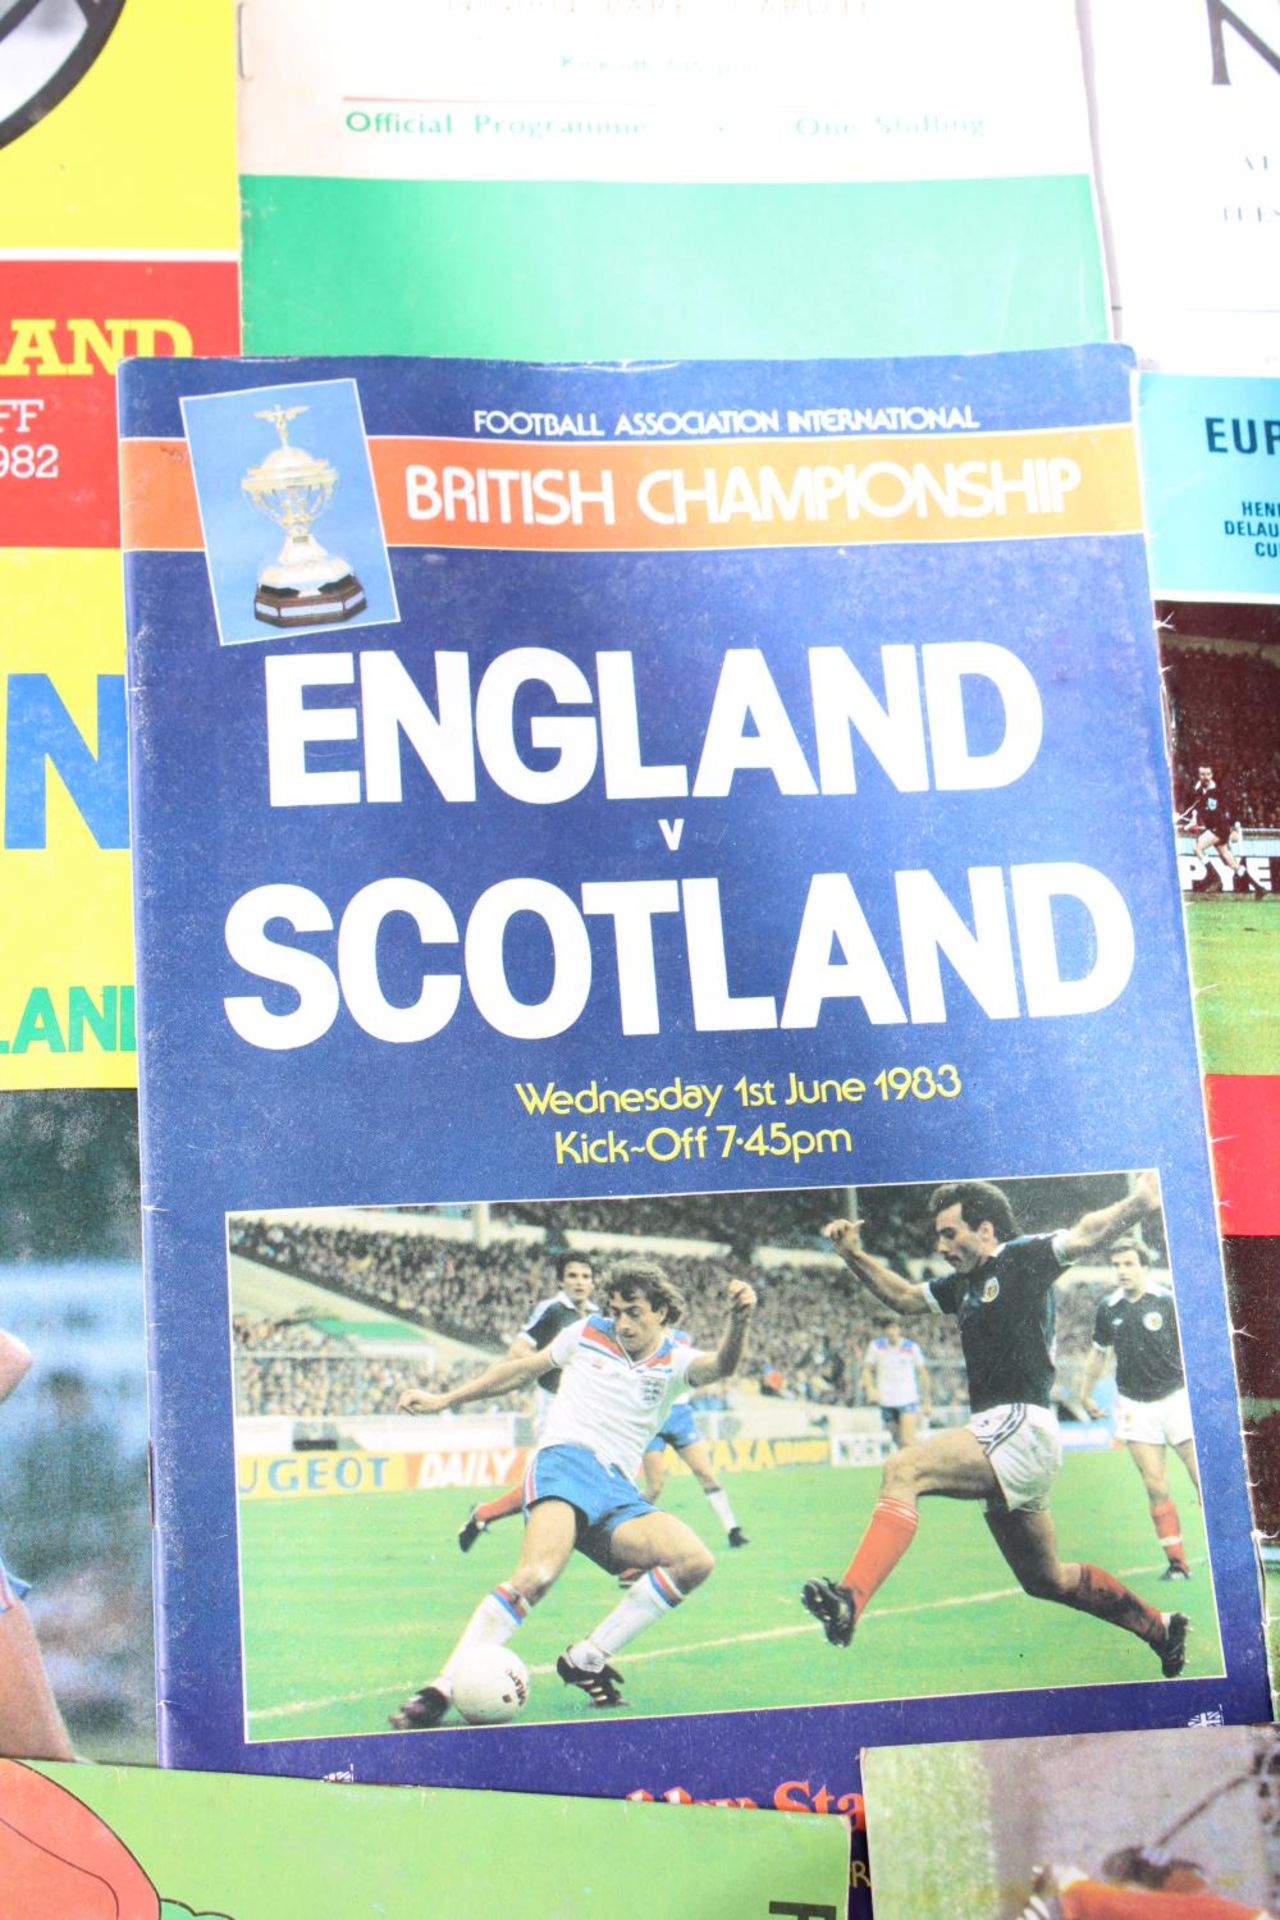 AN ASSORTMENT OF VINTAGE AND RETRO INTERNATIONAL FOOTBALL PROGRAMMES TO INCLUDE A 1984 ENGLAND VS - Image 6 of 6